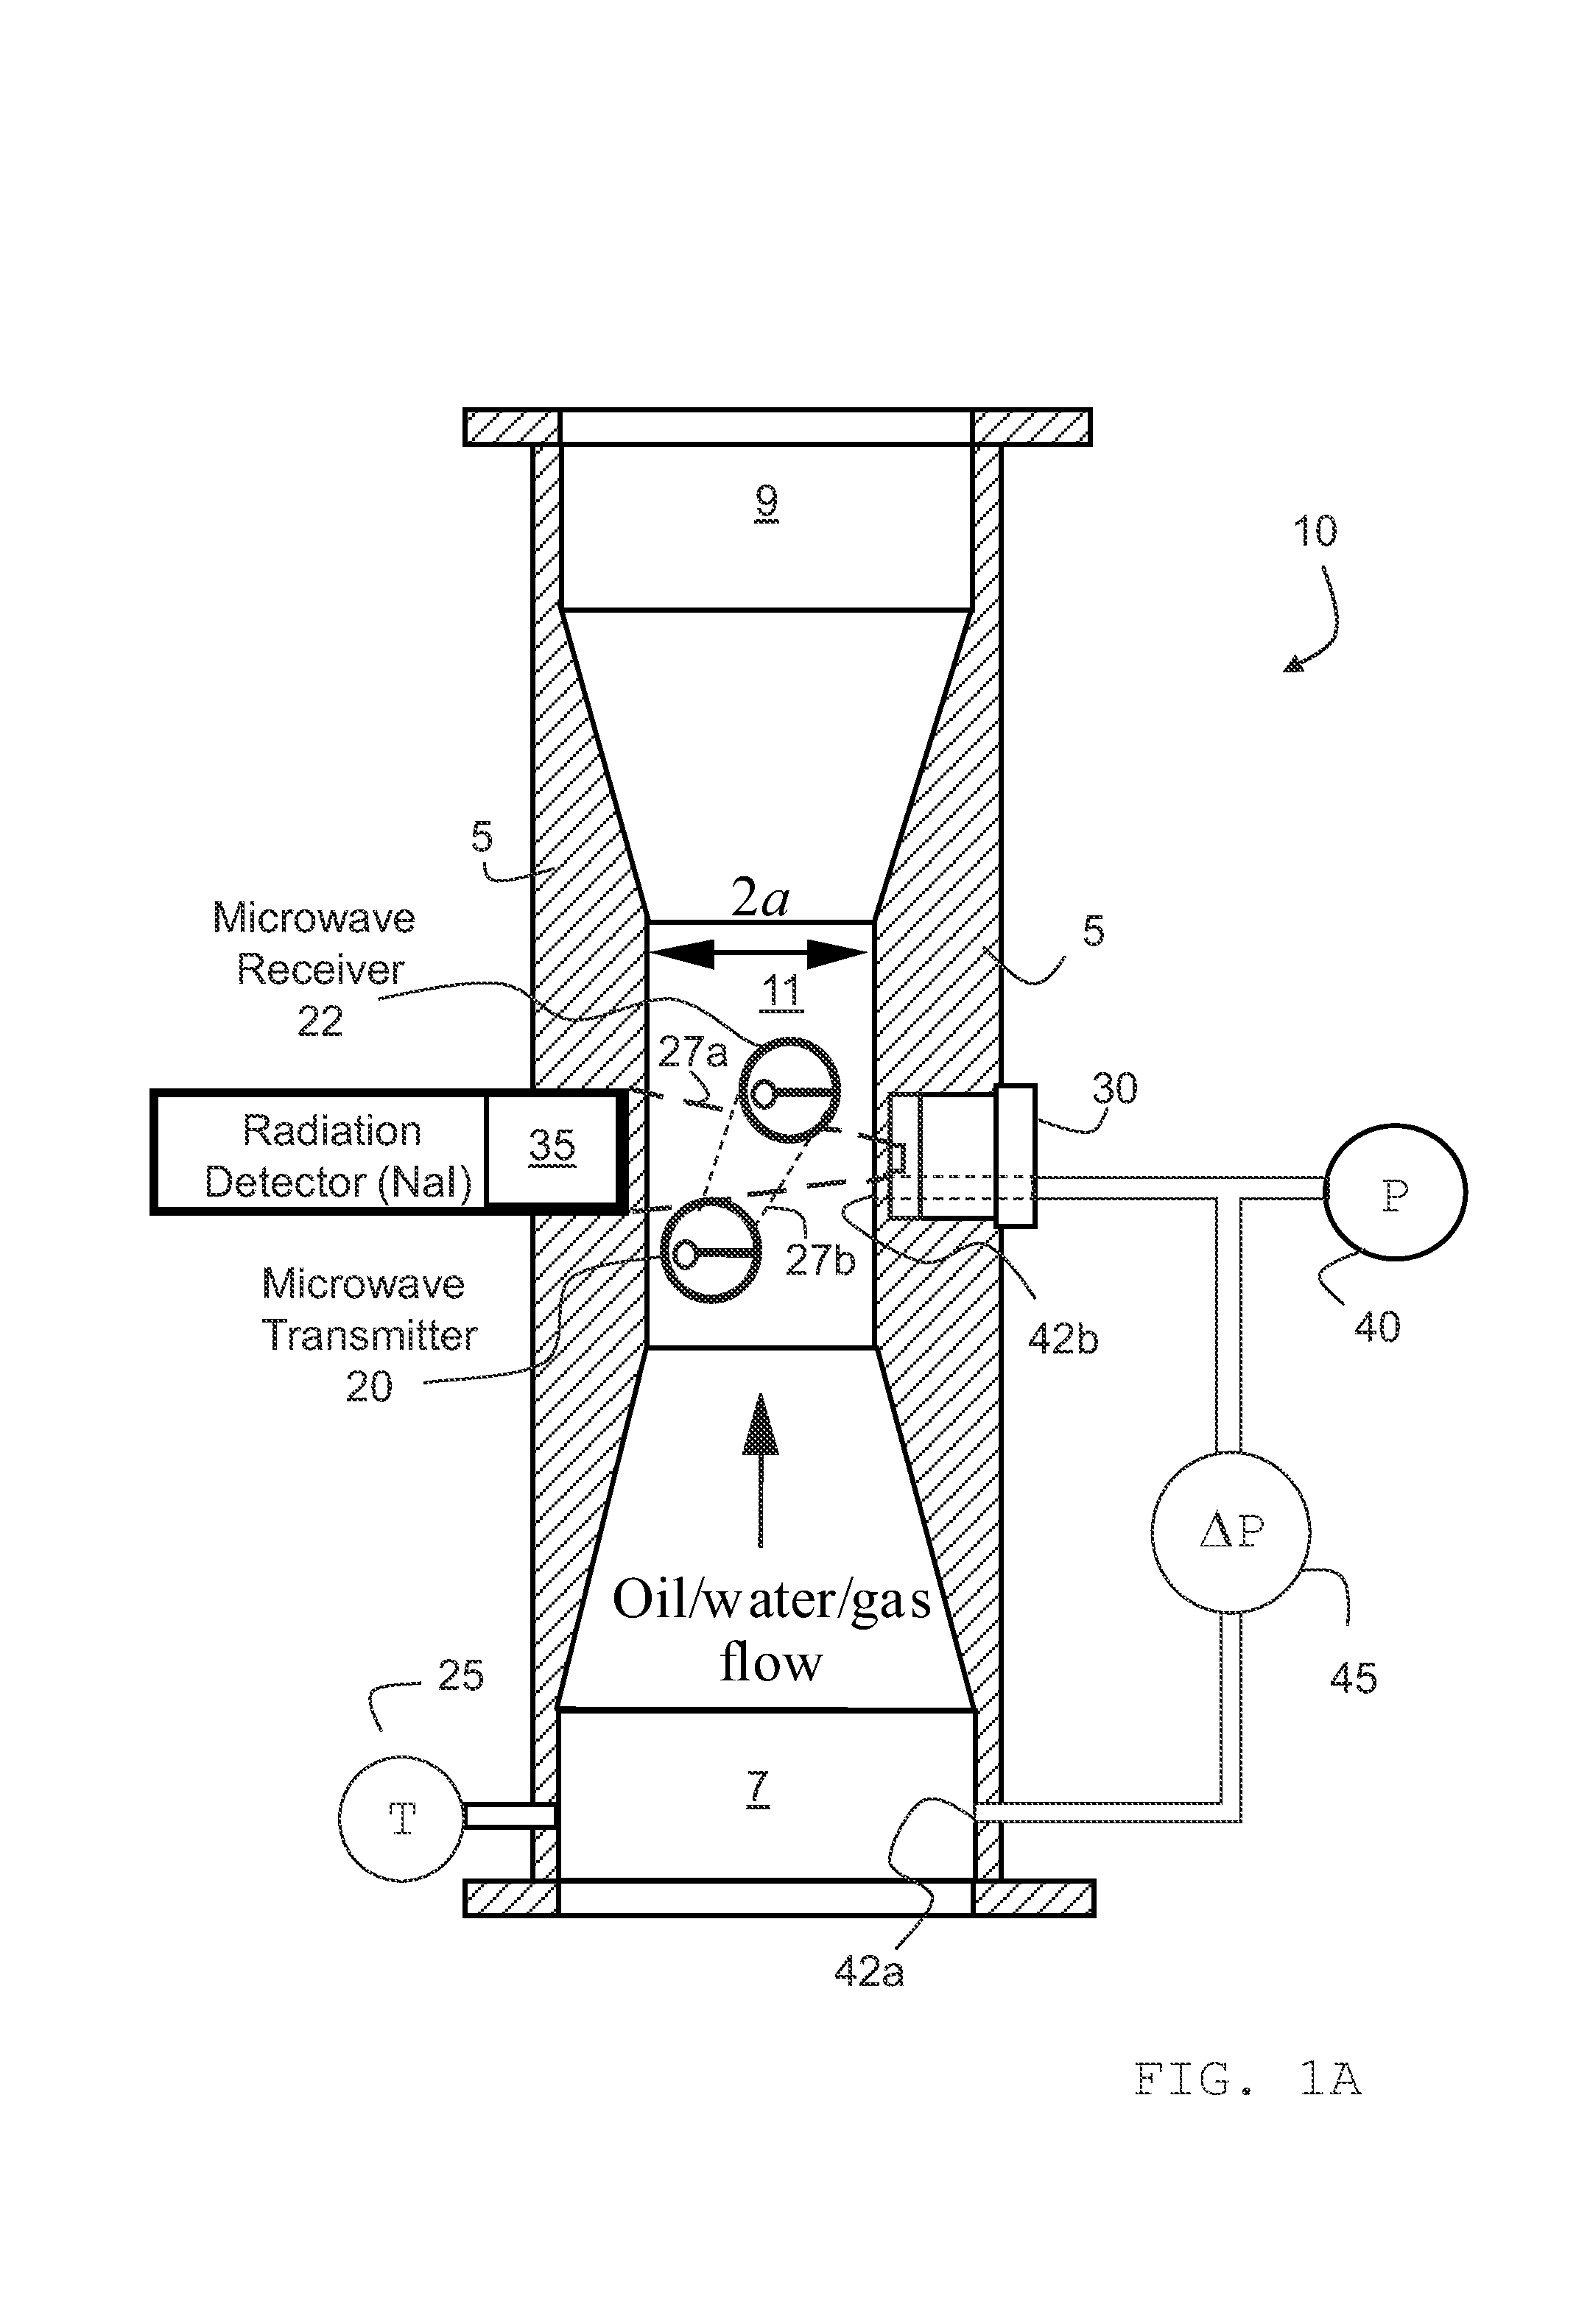 Systems and methods for measuring multiphase flow in a hydrocarbon transporting pipeline